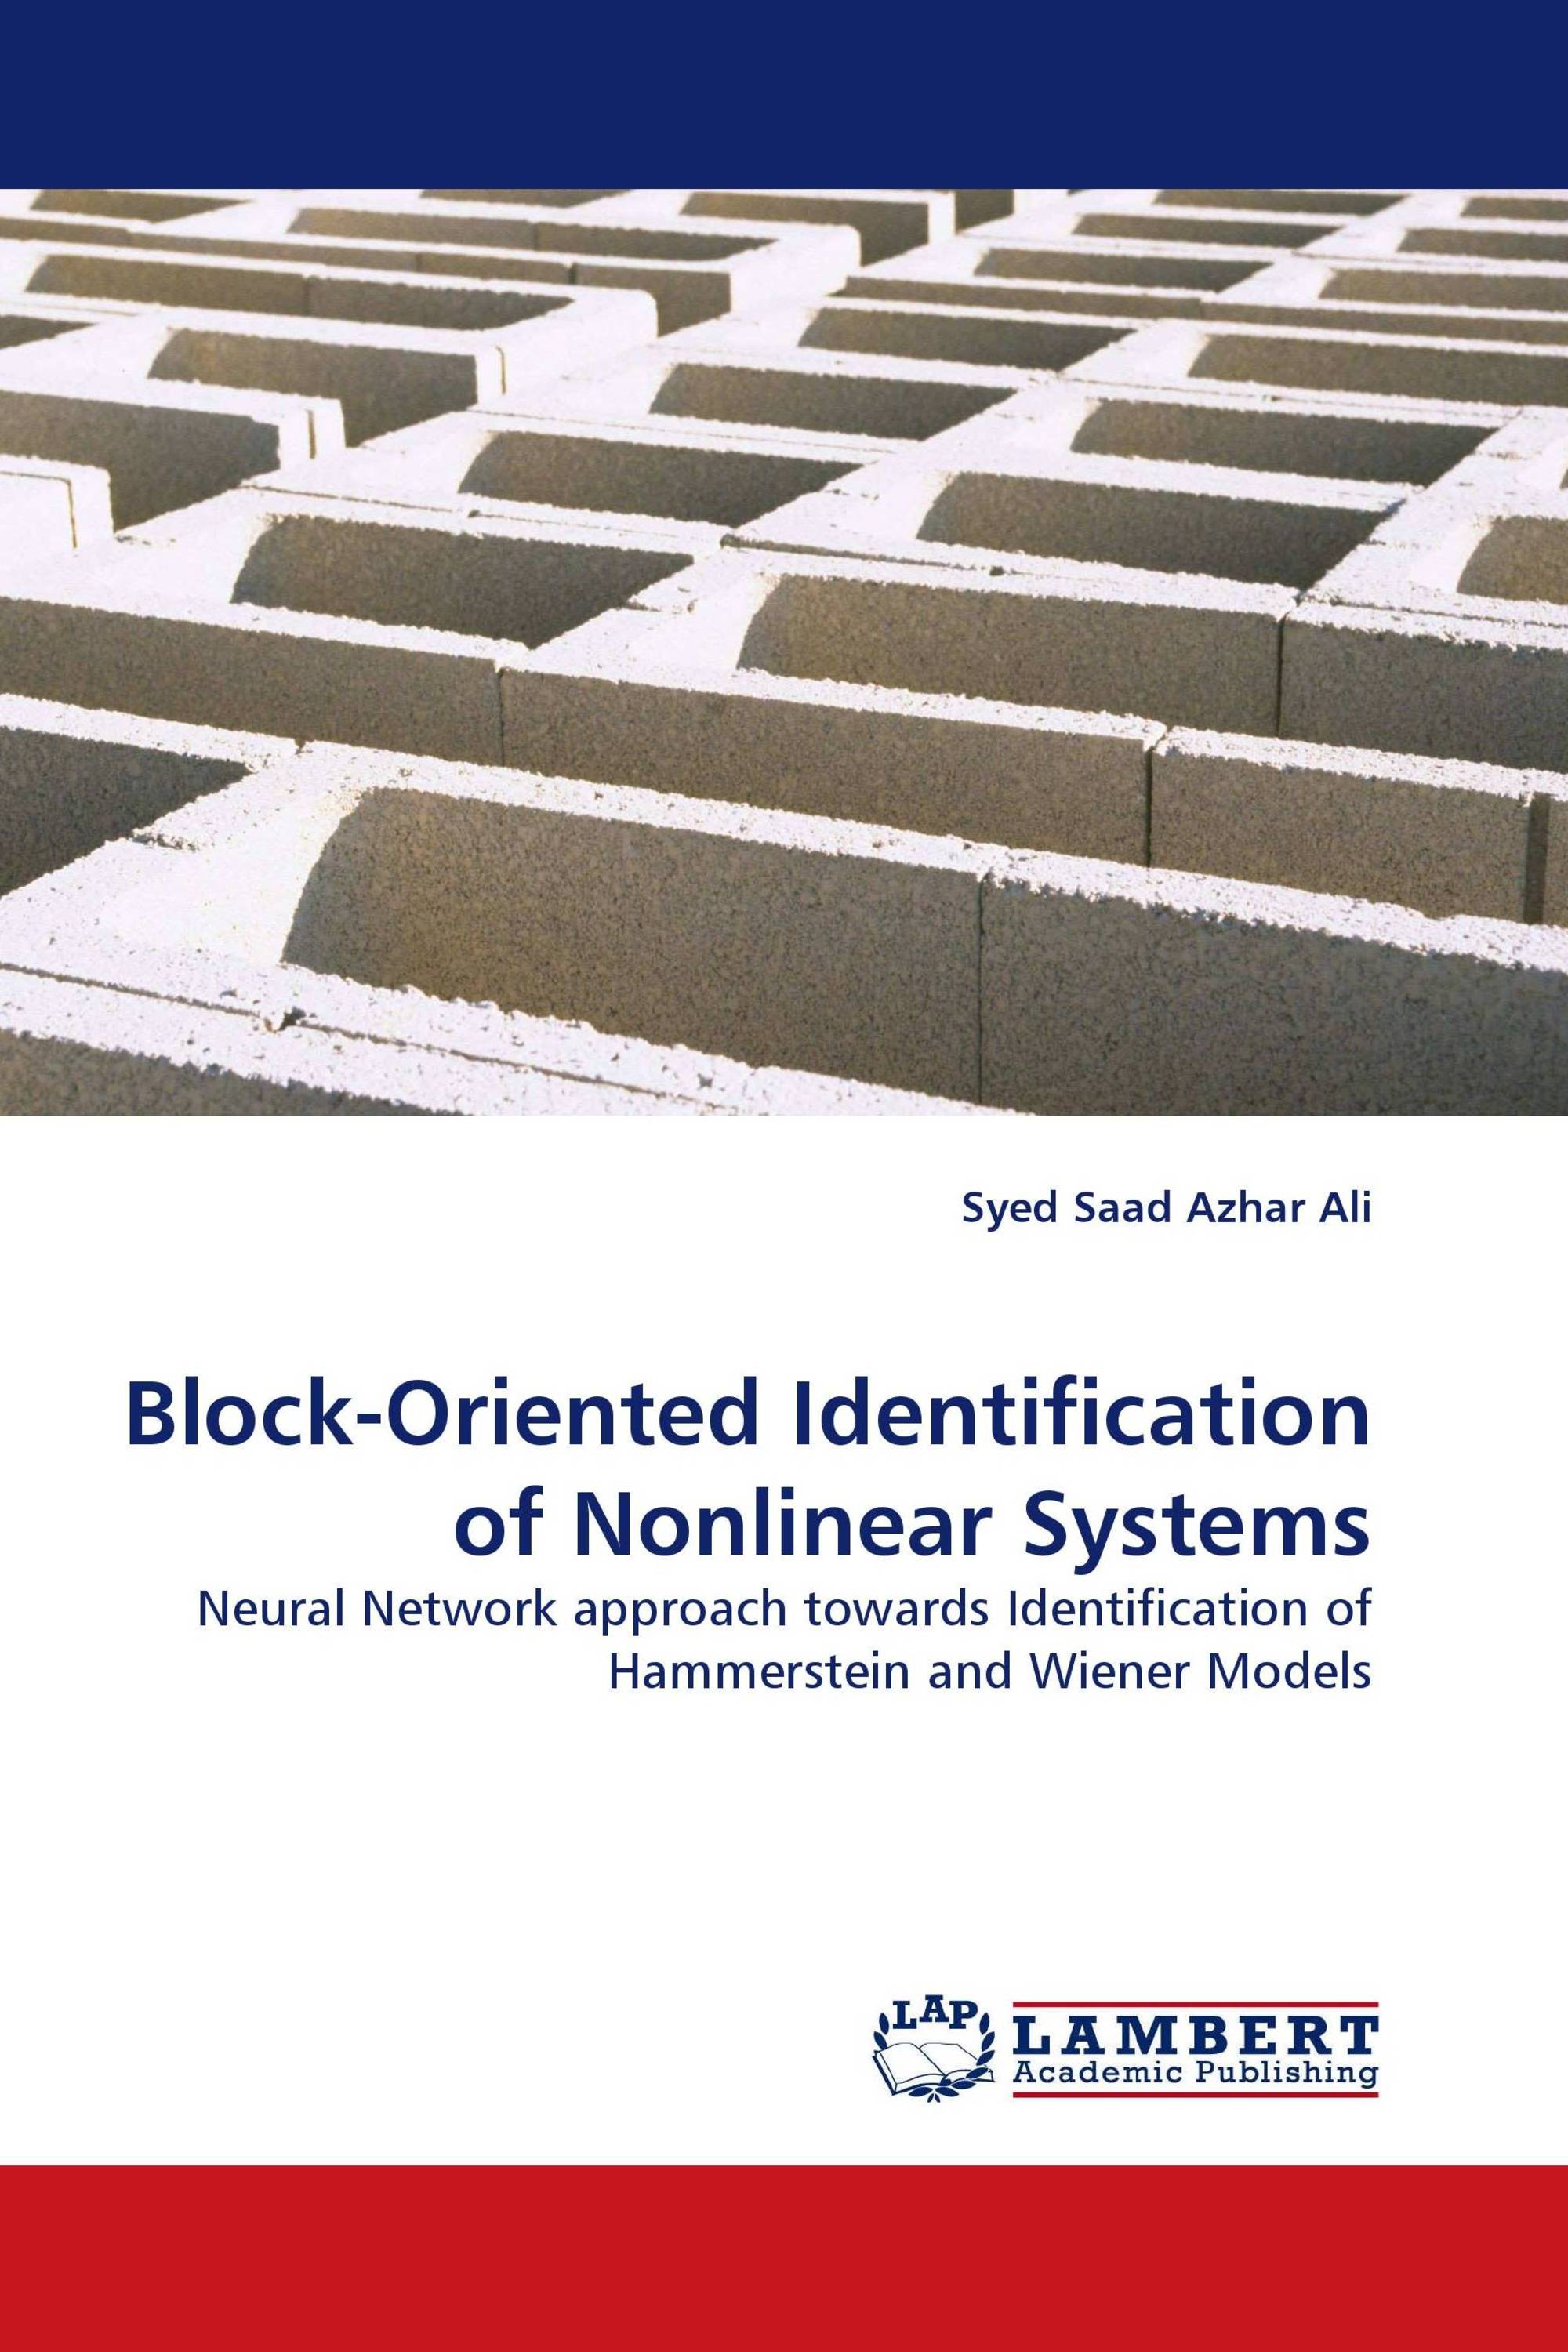 Block-Oriented Identification of Nonlinear Systems